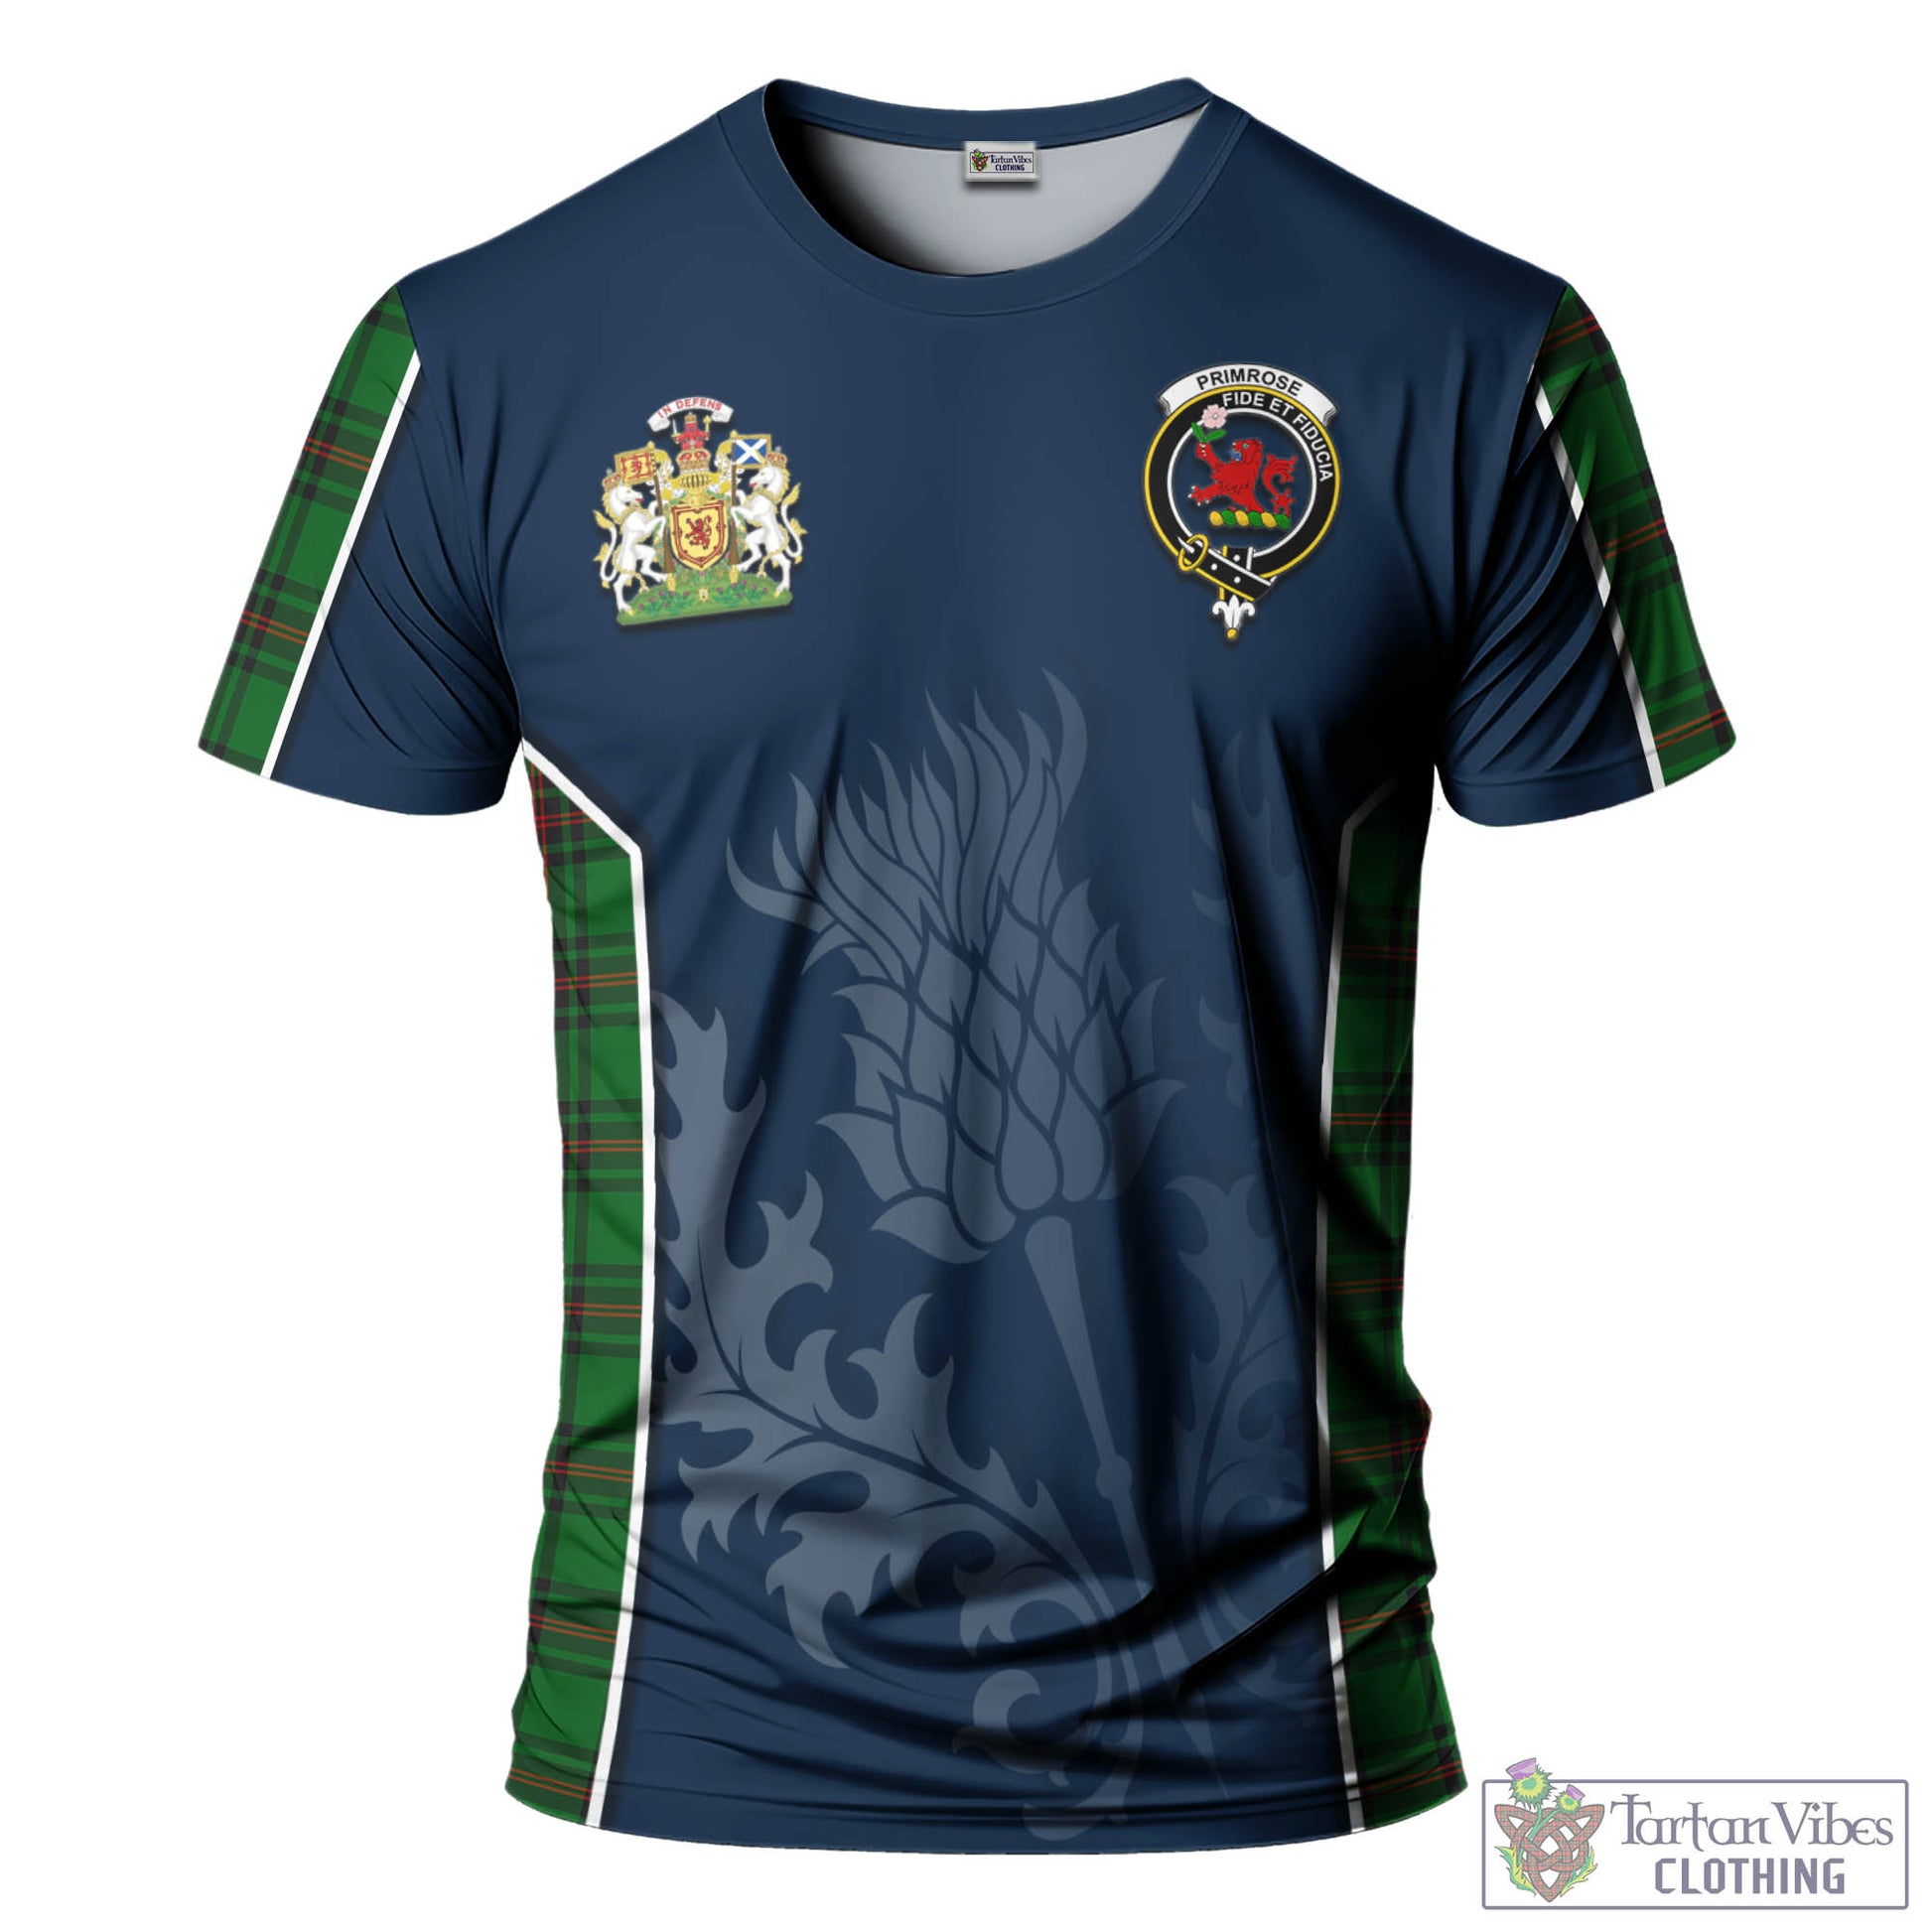 Tartan Vibes Clothing Primrose Tartan T-Shirt with Family Crest and Scottish Thistle Vibes Sport Style